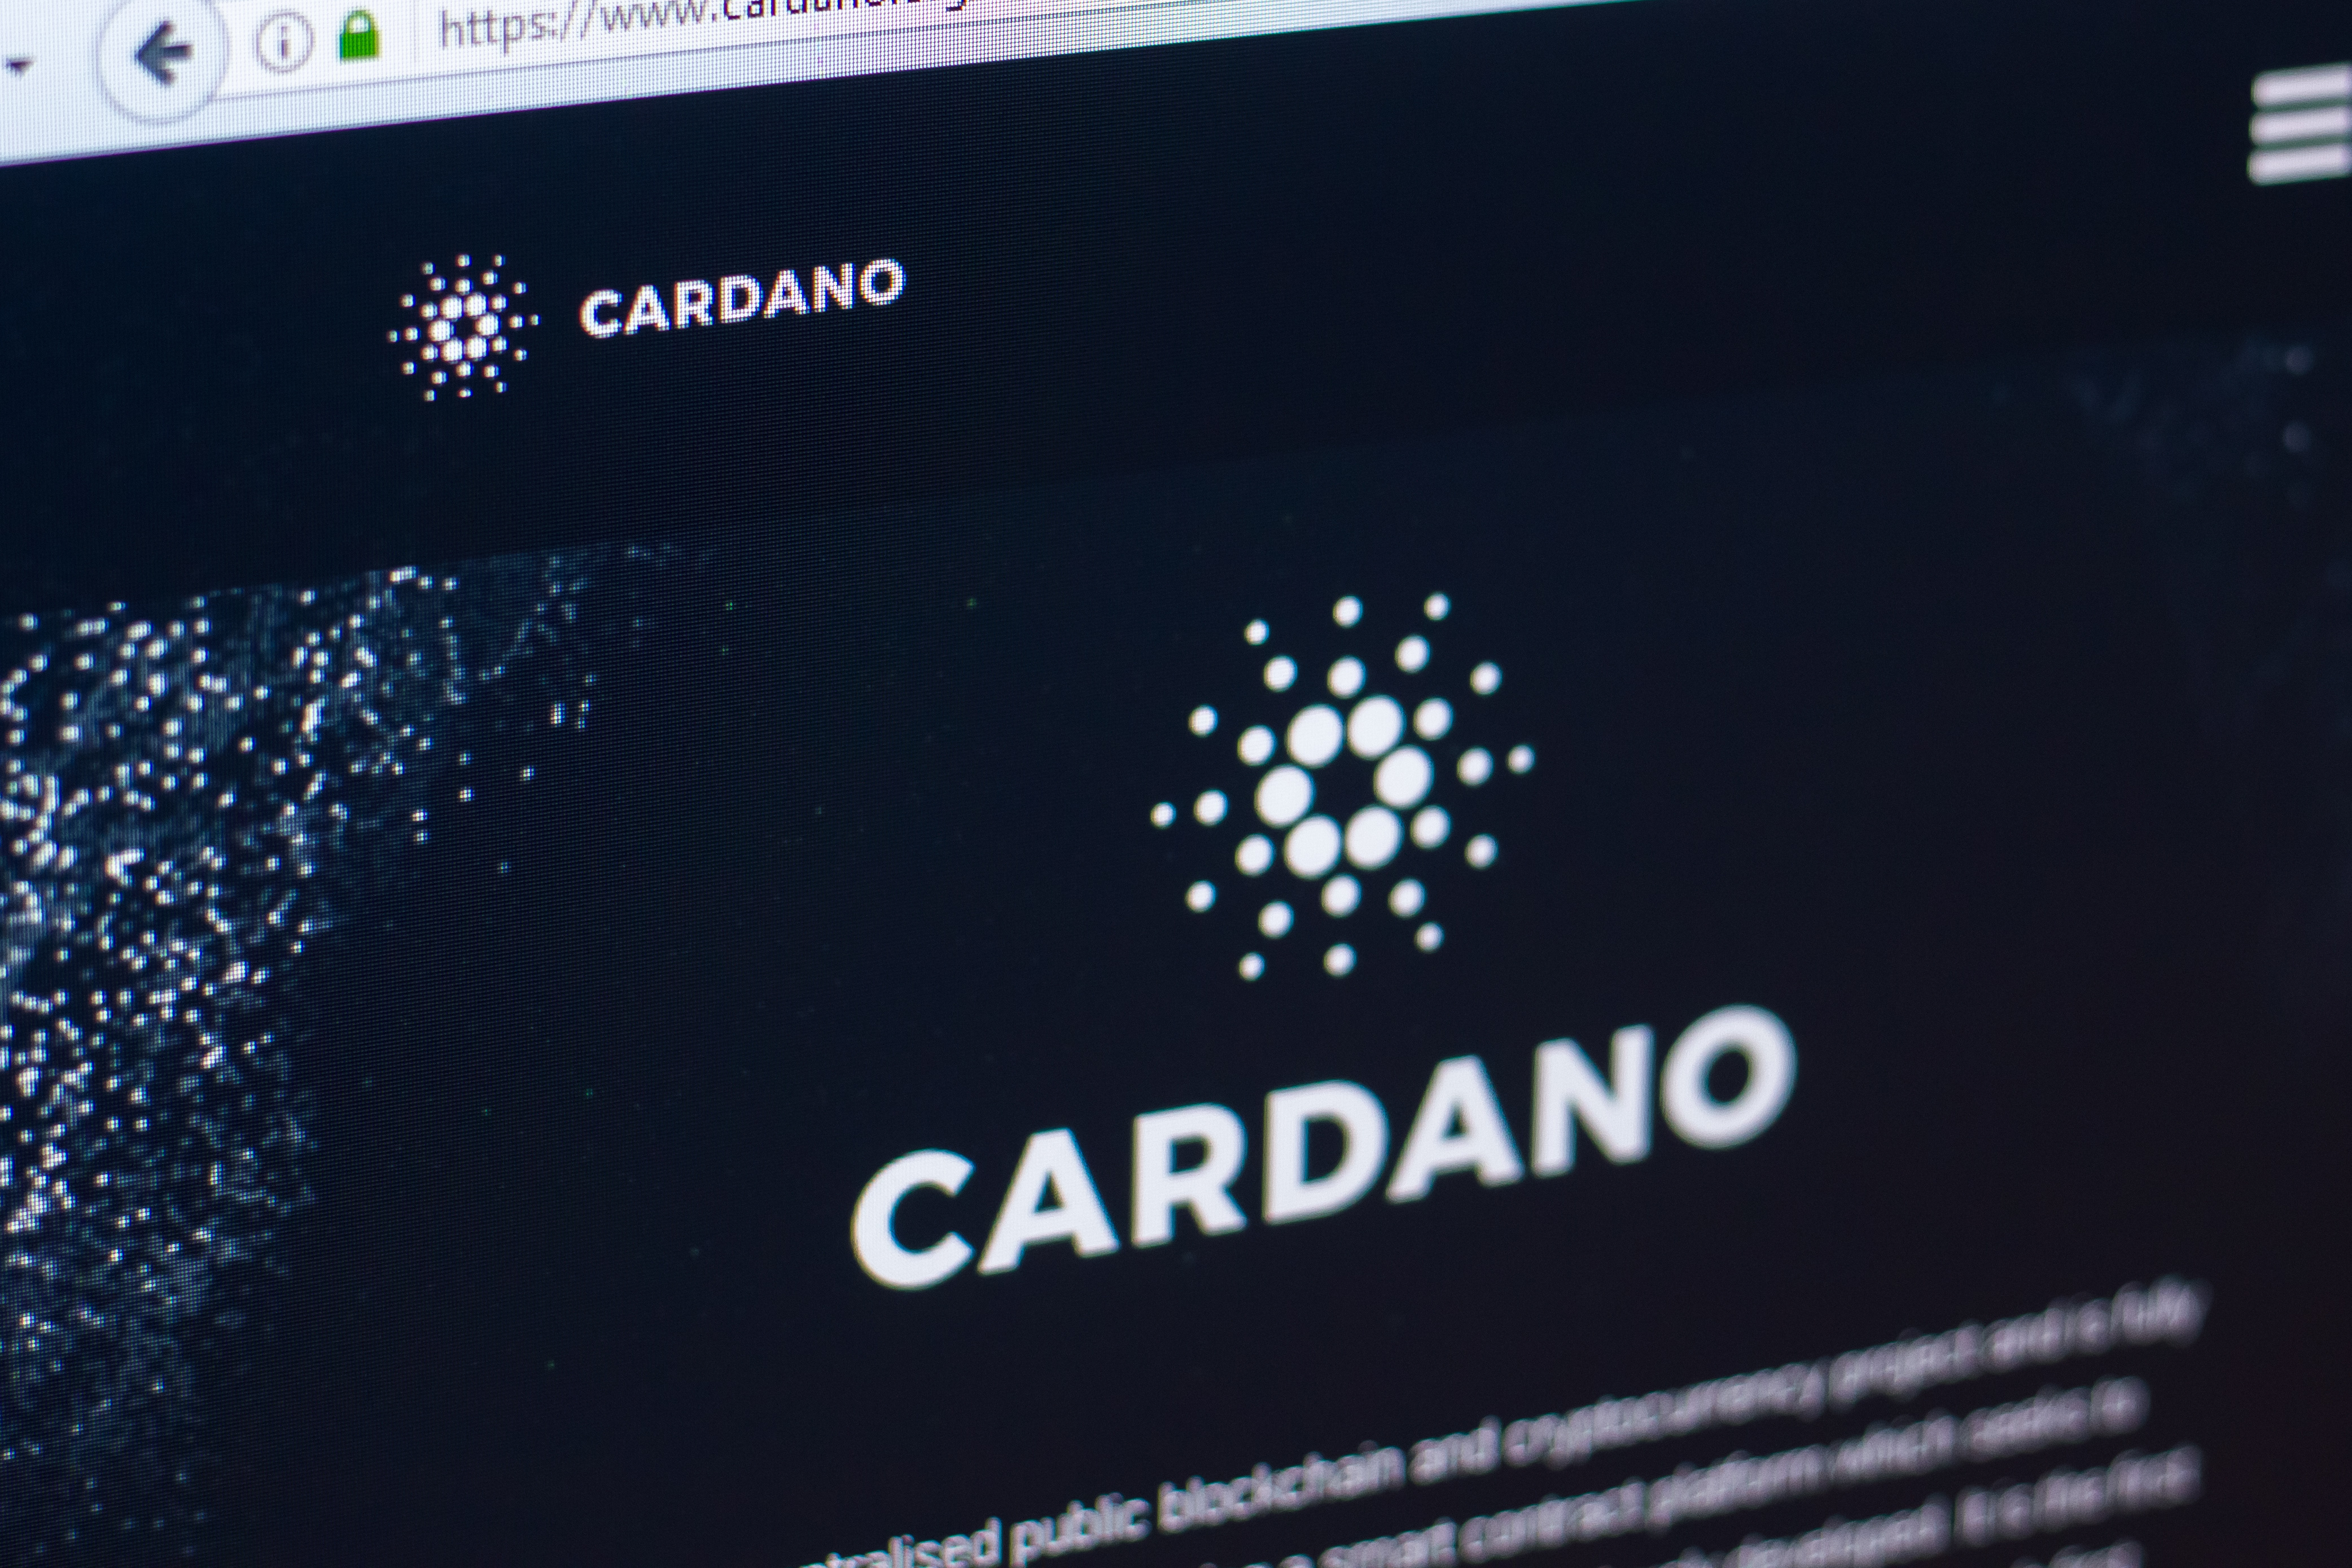 Cardano Launches First Fully Public Testnet That Supports Smart Contracts